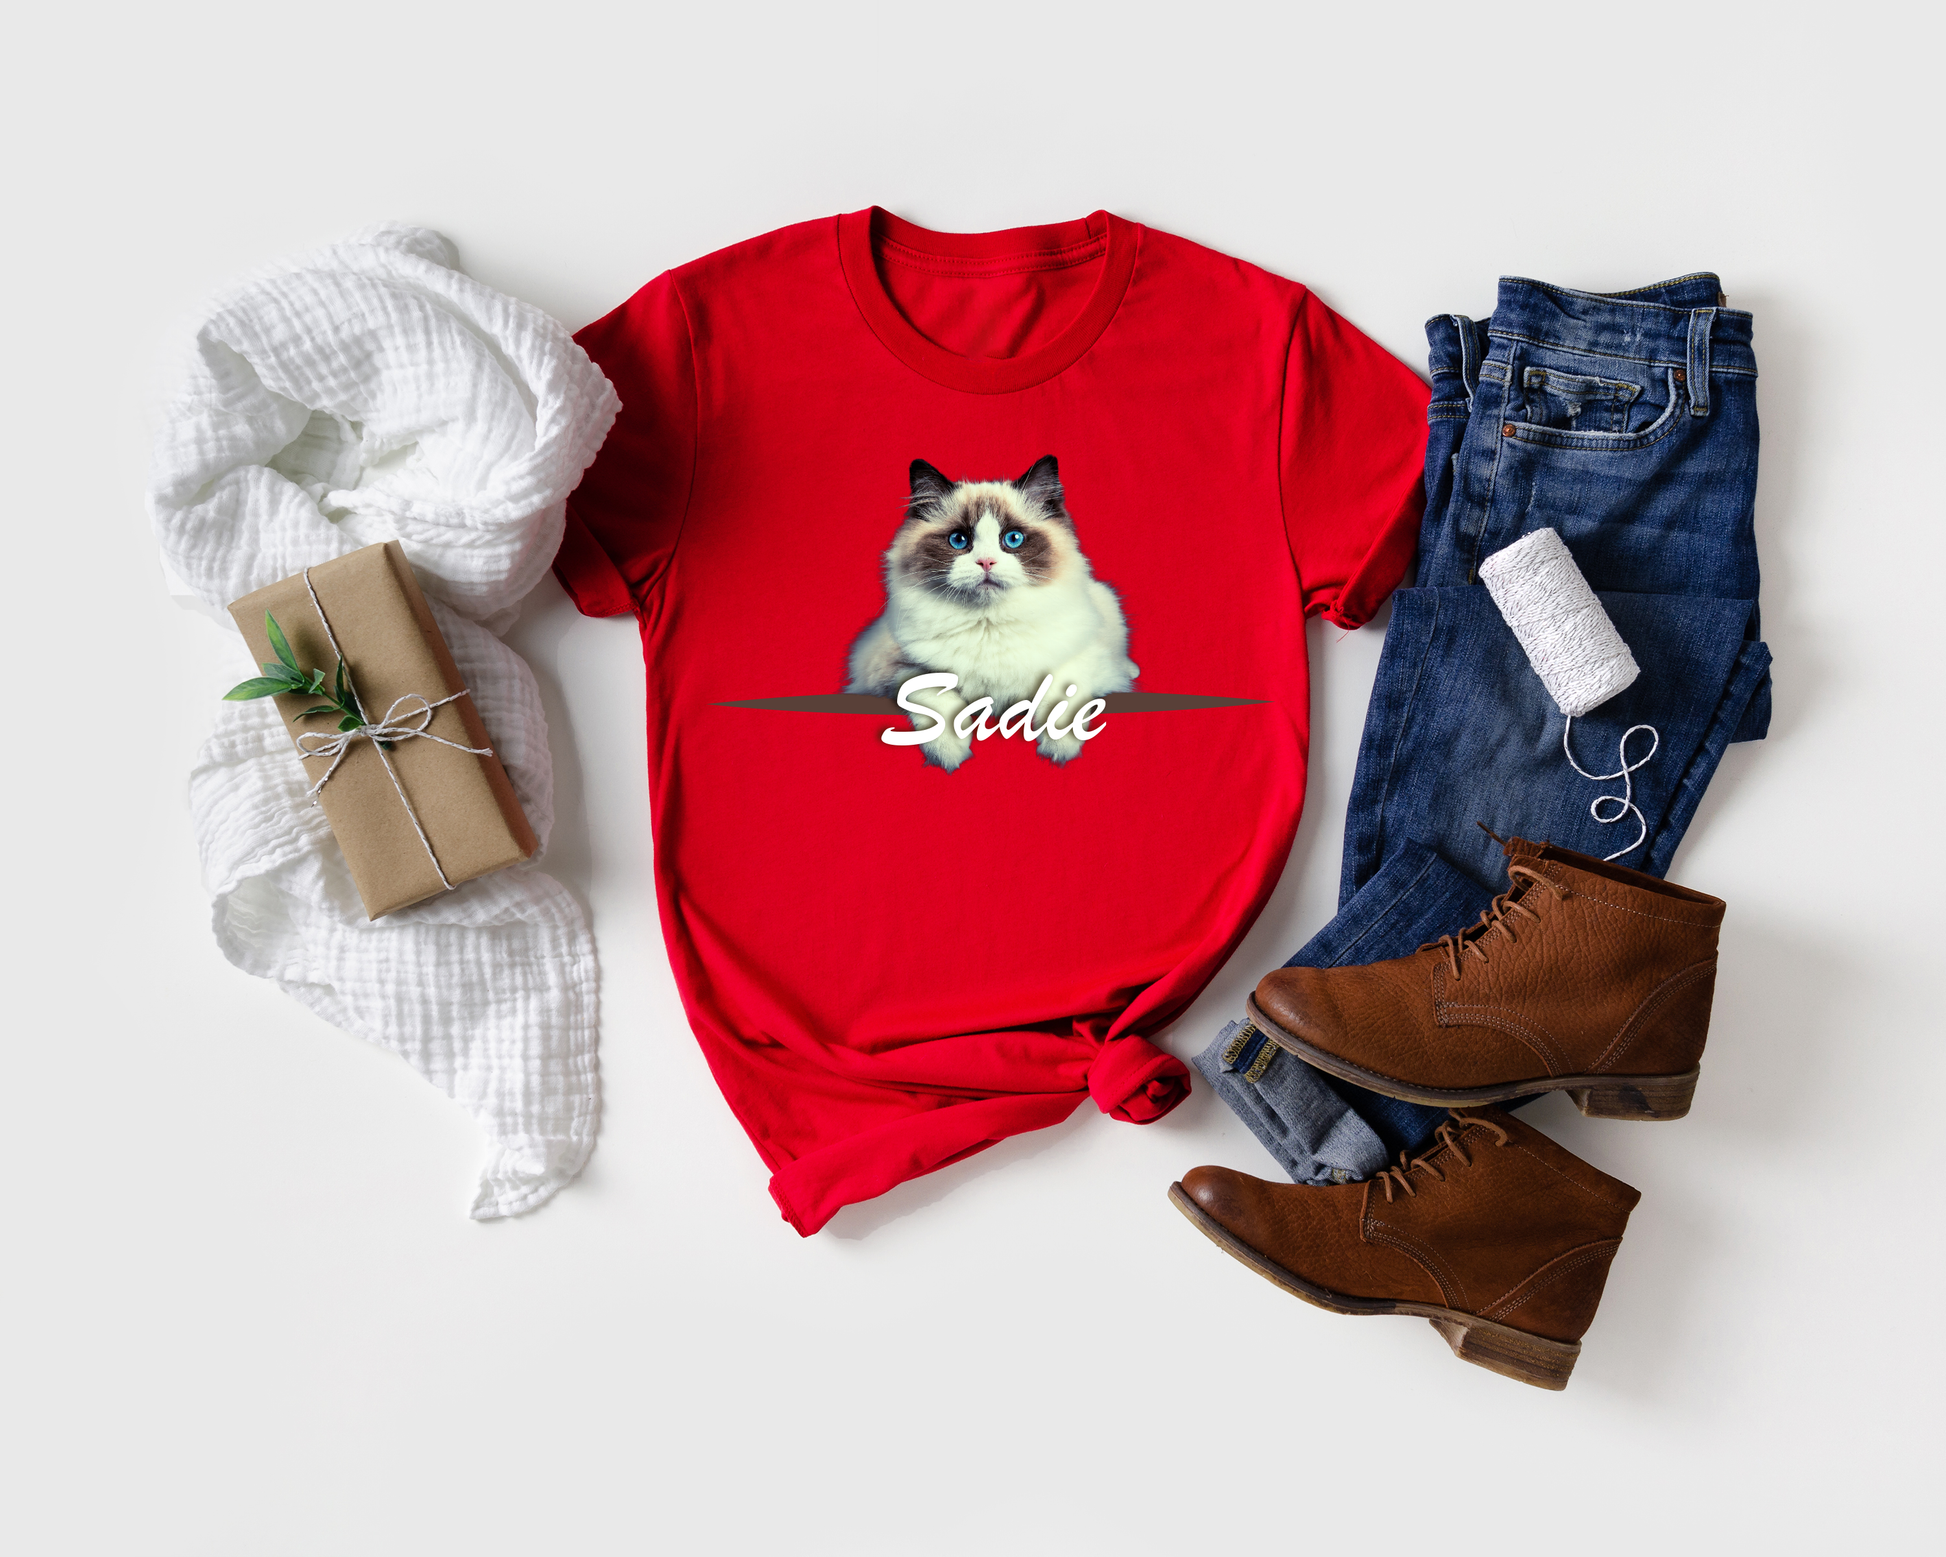  Personalized Pet T-Shirt: Design a custom t-shirt with your pet's photo and name.